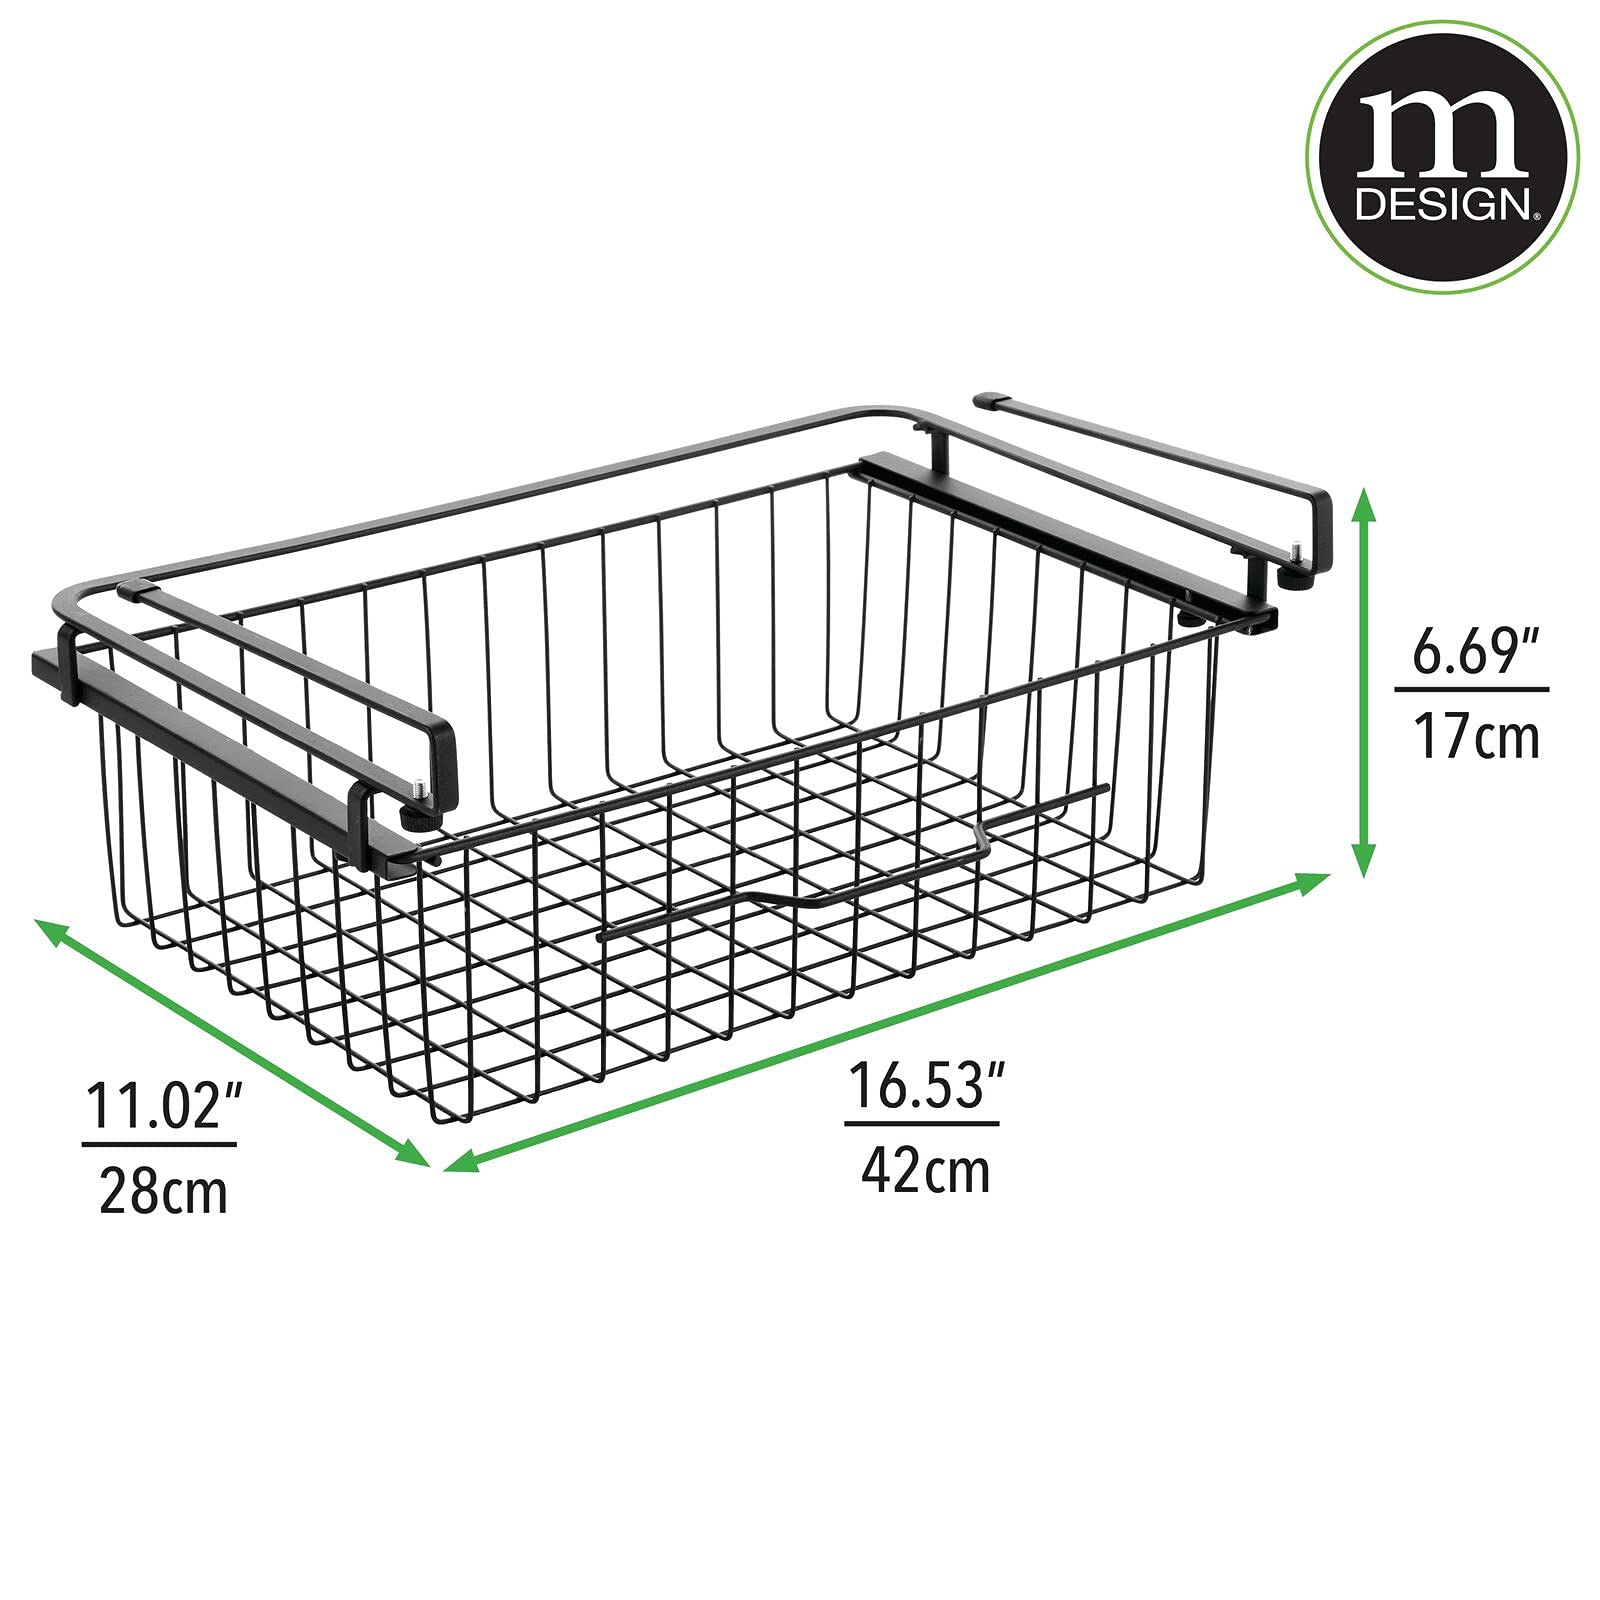 mDesign Large Metal Wire Hanging Pullout Drawer Basket - Sliding Under Shelf Storage Organizer - Attaches to Shelving - Easy Install - Black